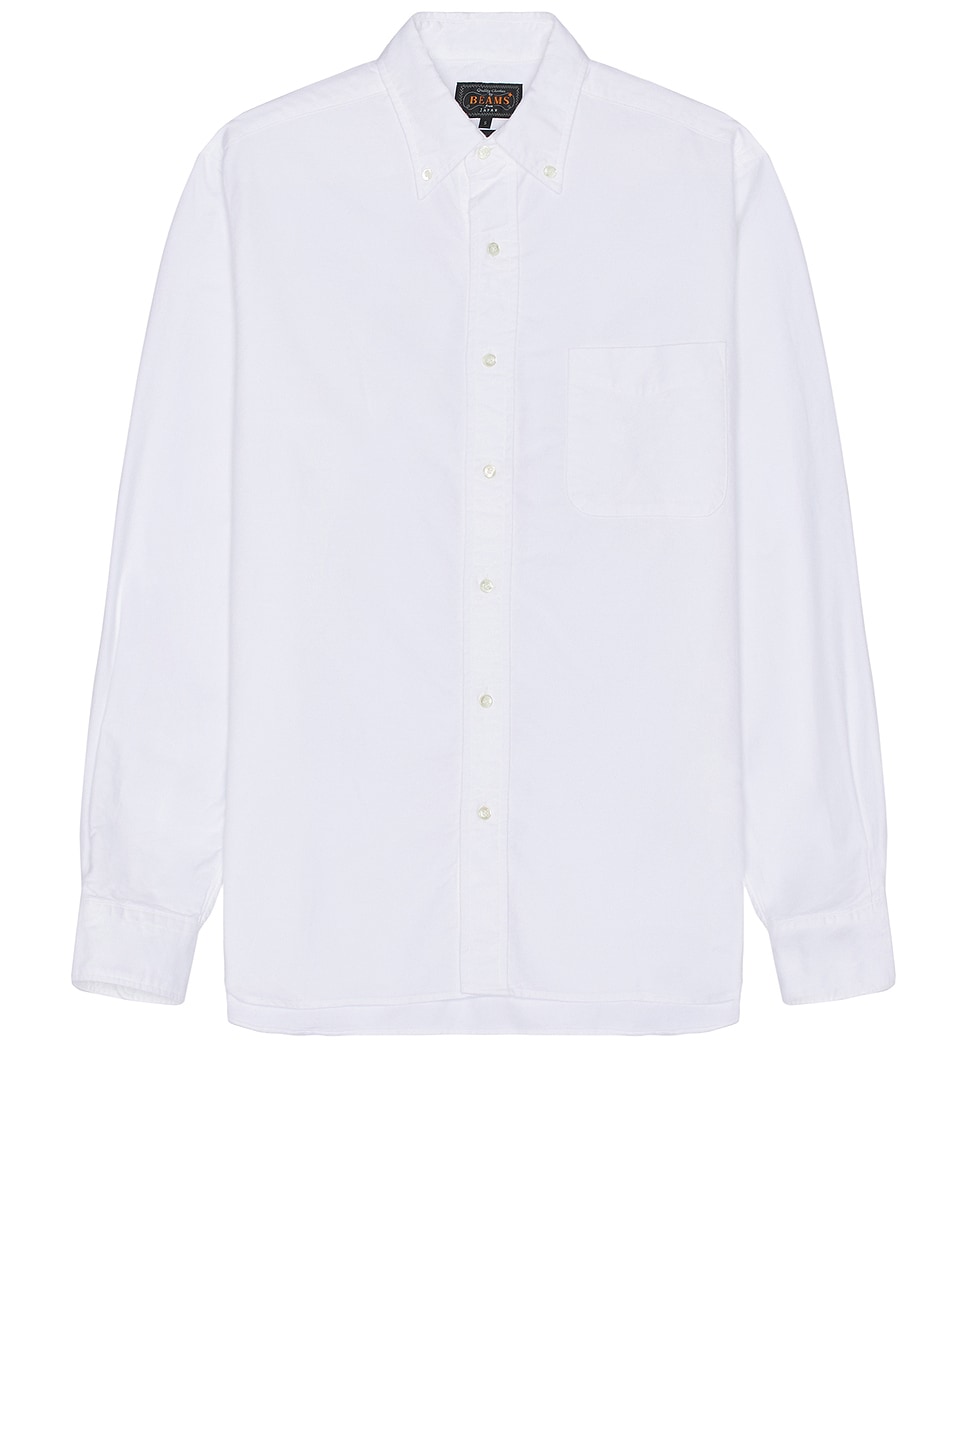 Image 1 of Beams Plus B.d. Oxford in White